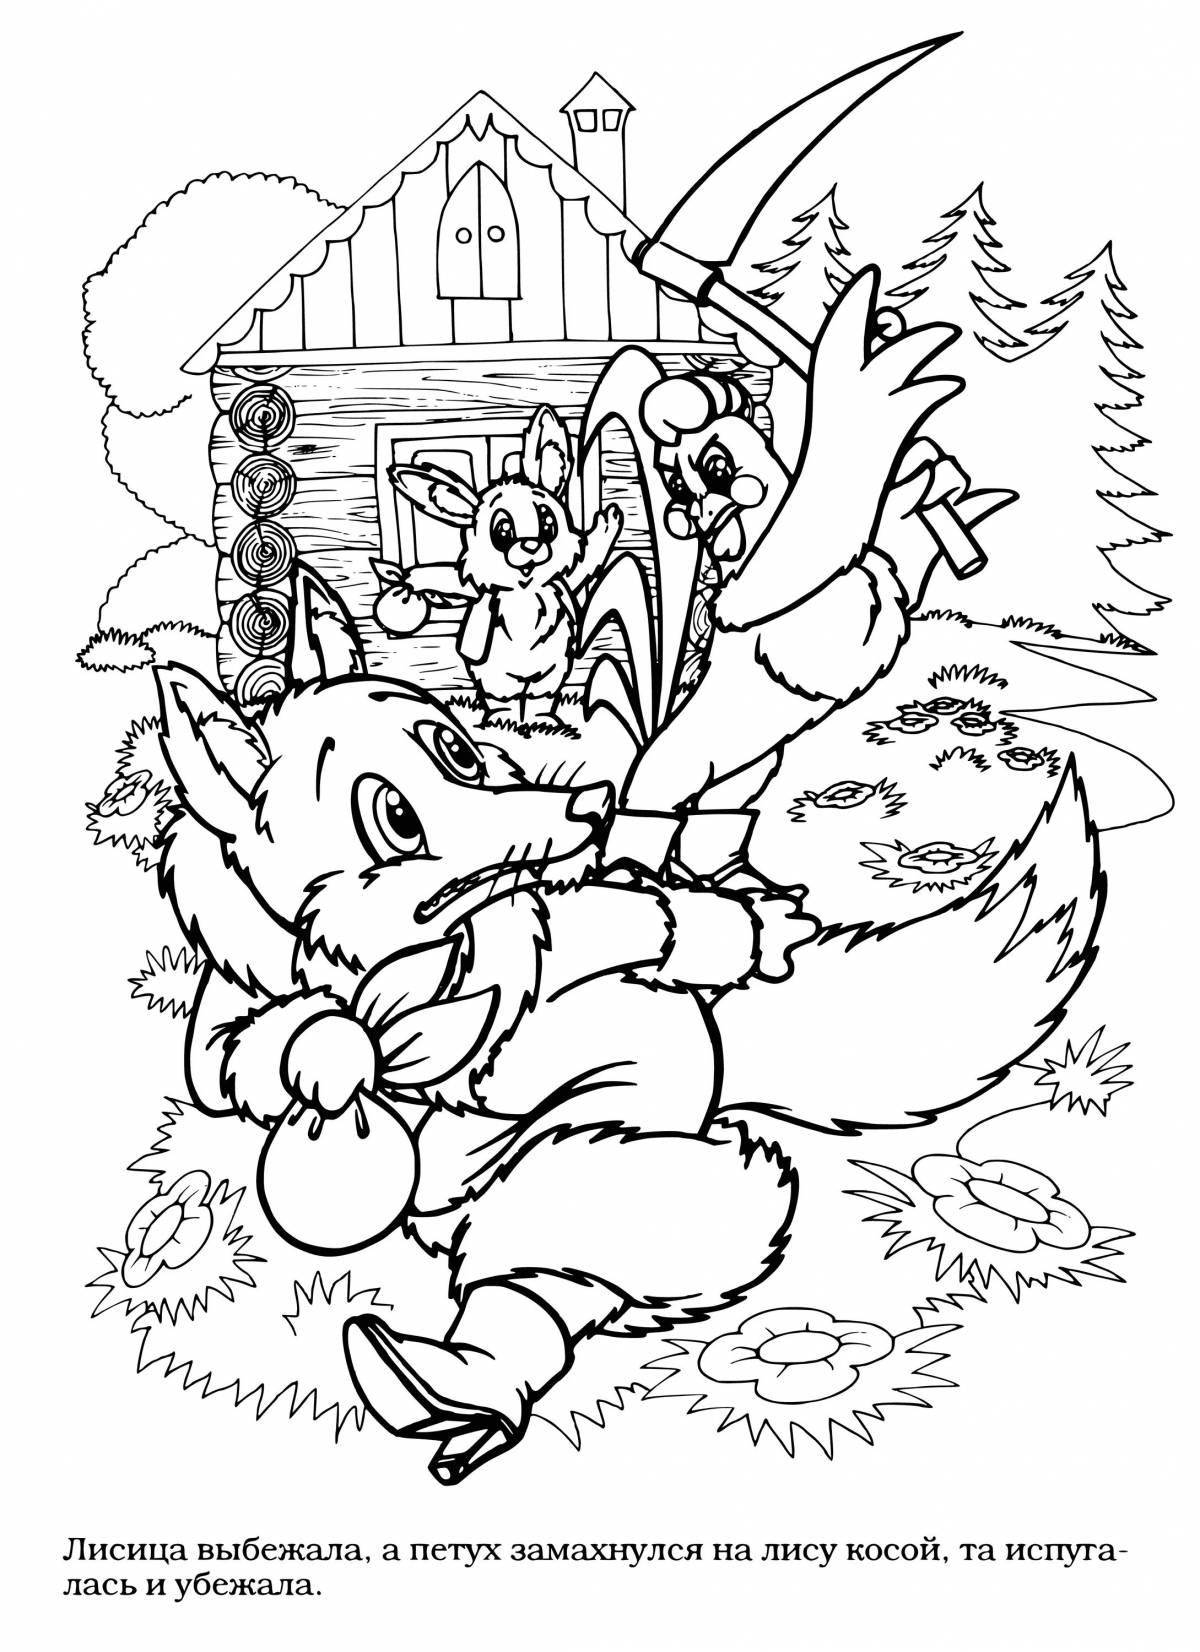 Chic coloring fox and rooster Russian folk tale